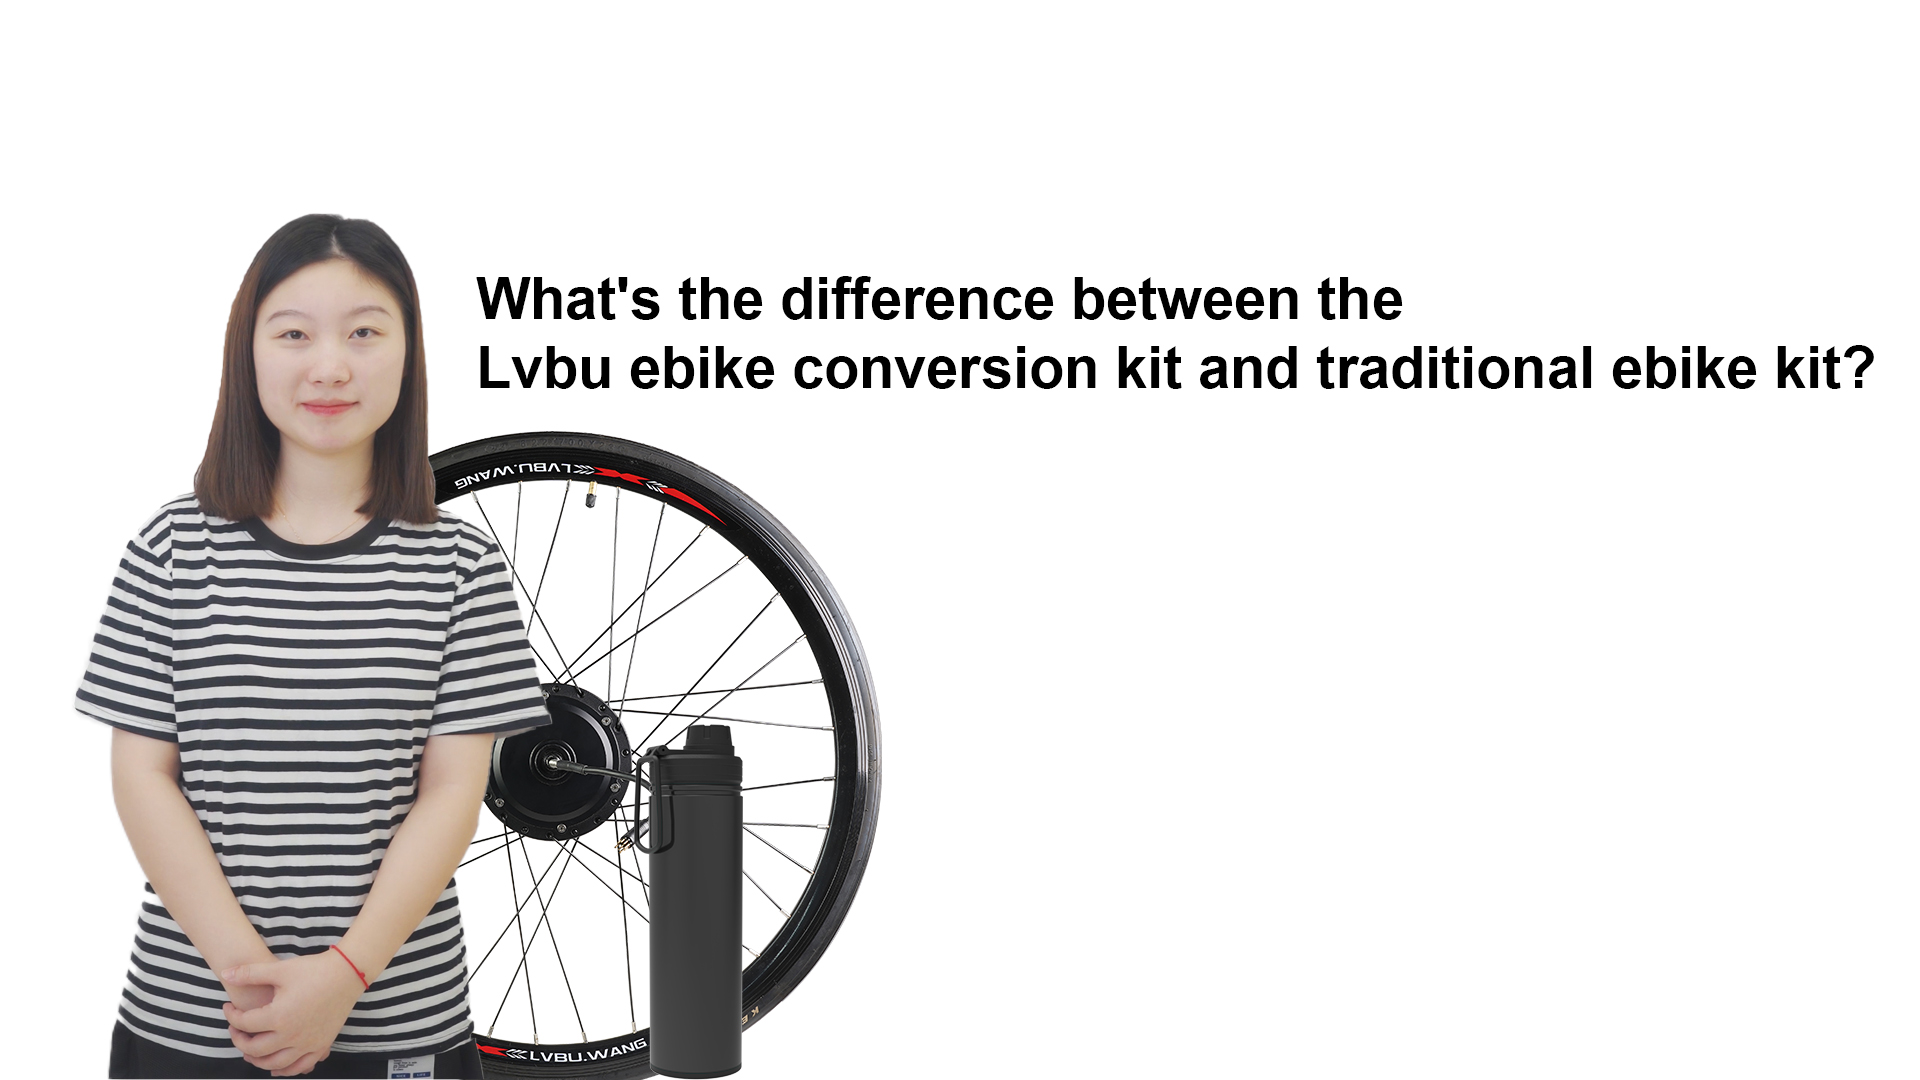 Difference between the Lvbu ebike conversion kit and traditional ebike kit?